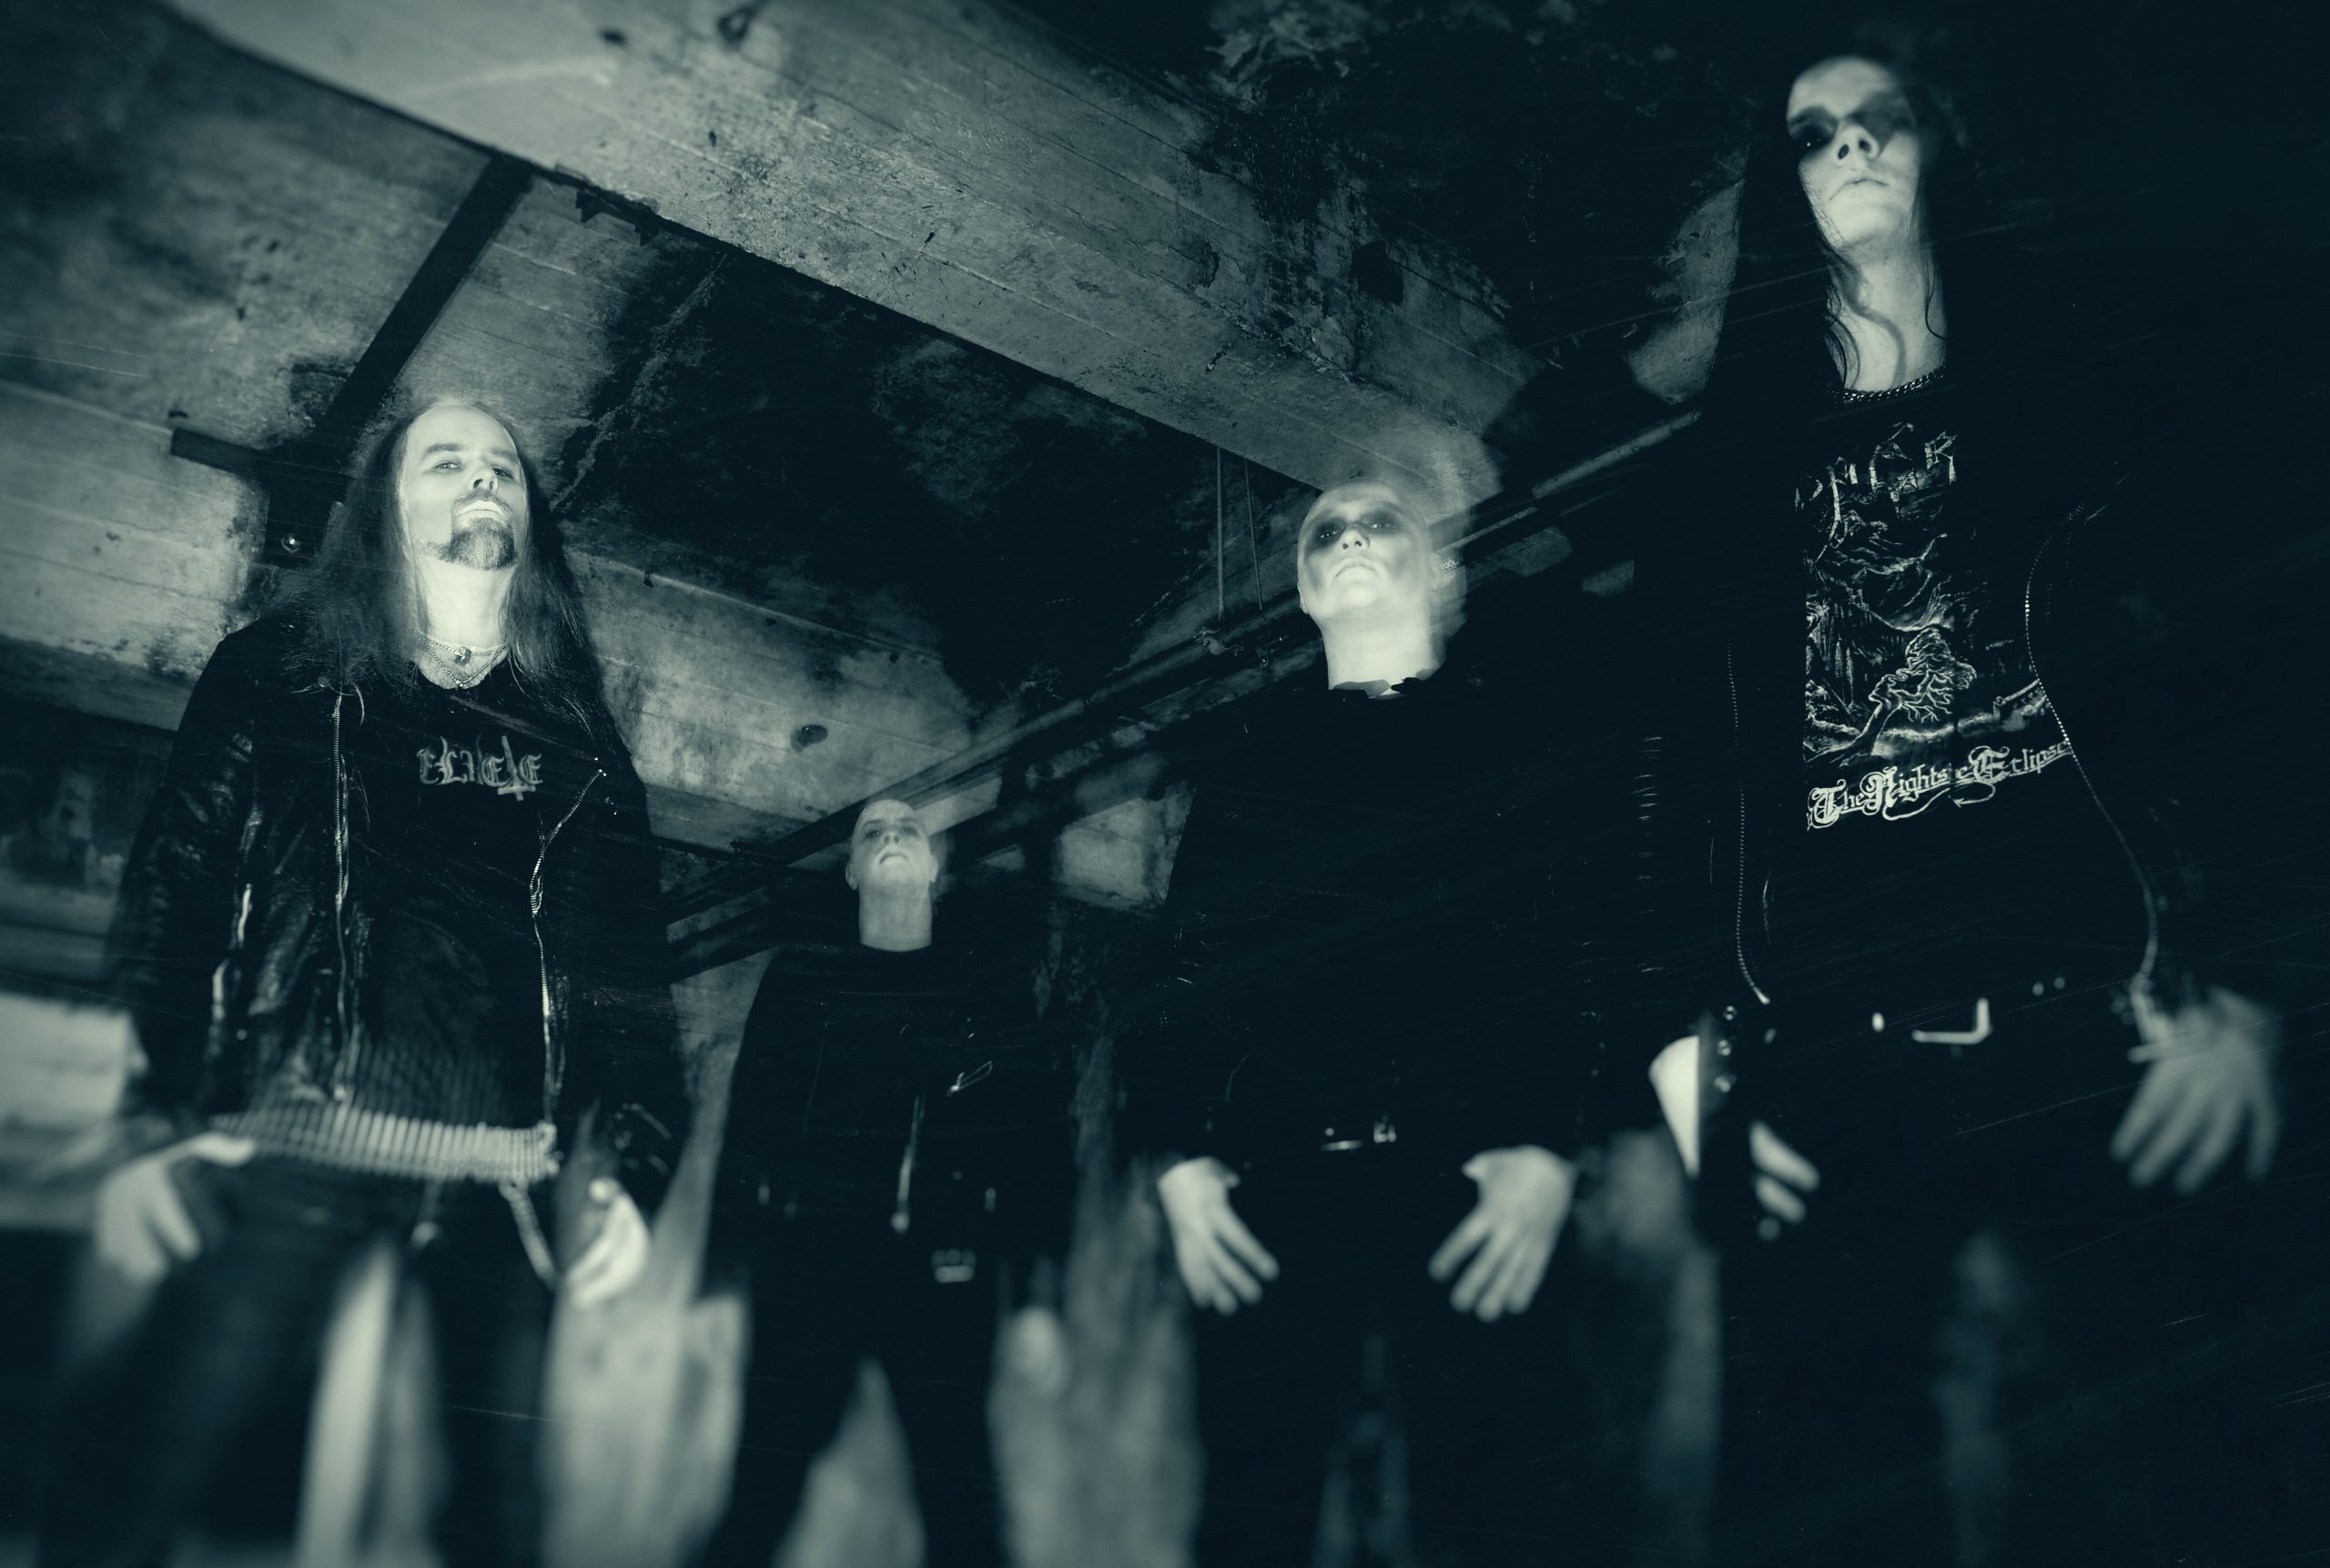 You are currently viewing INSOMNIUM, PARADISE LOST Members Launch New Black Metal band I AM THE NIGHT.